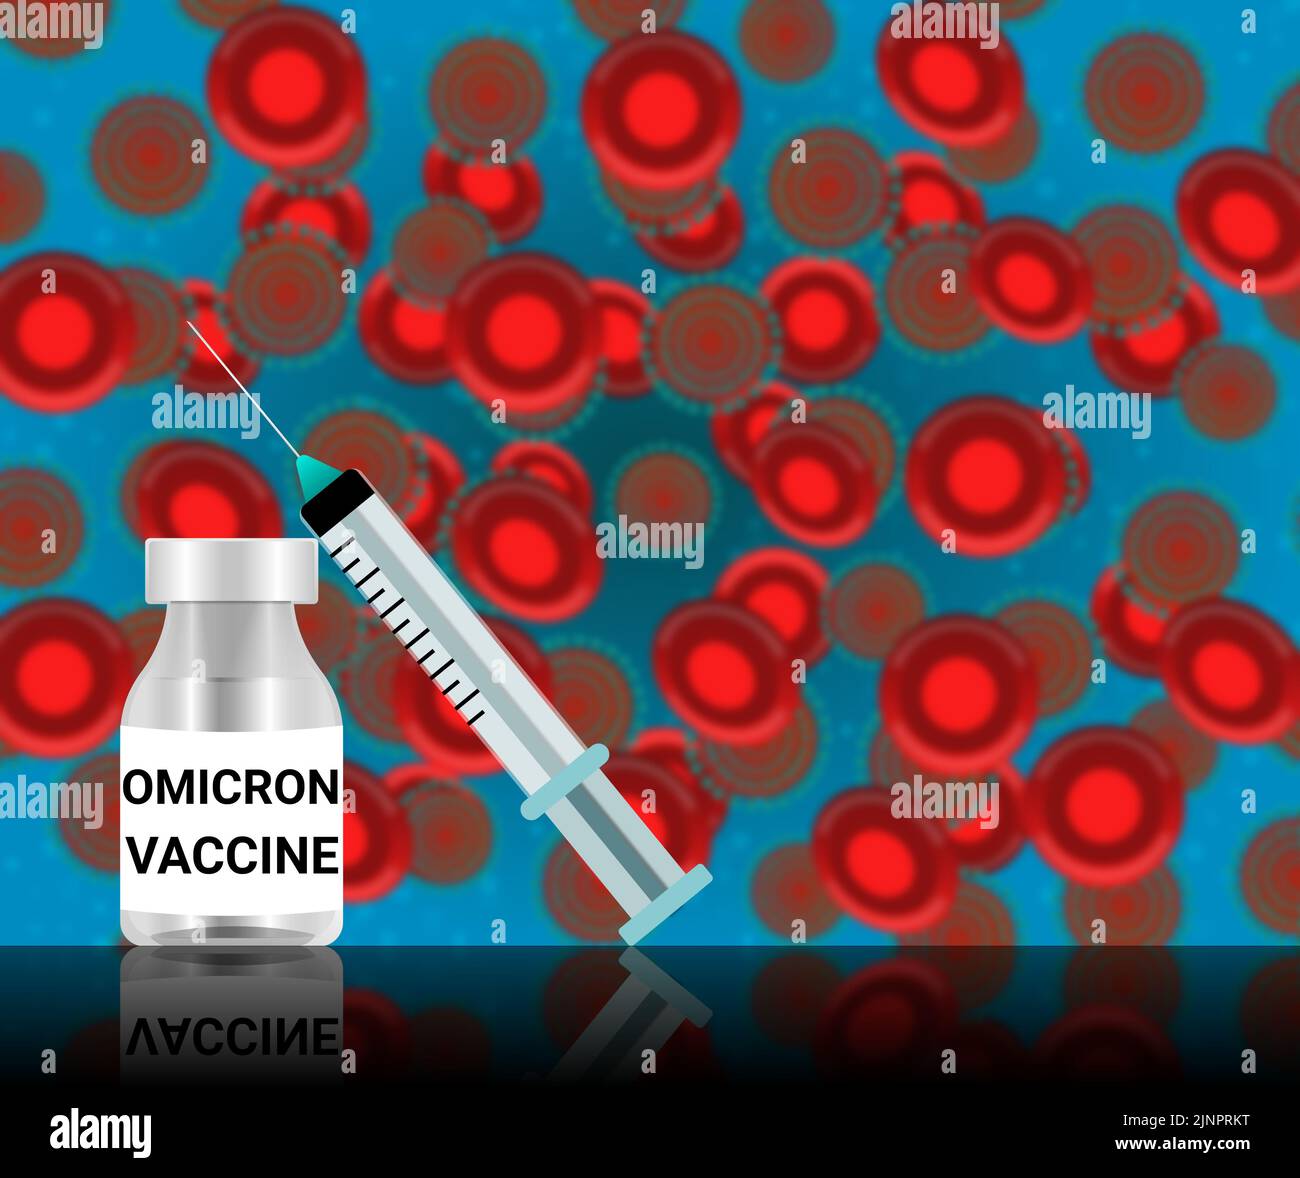 omicron virus vaccine on blur background and surface reflection. medical reasearch and health care awareness illustration and background. Stock Photo